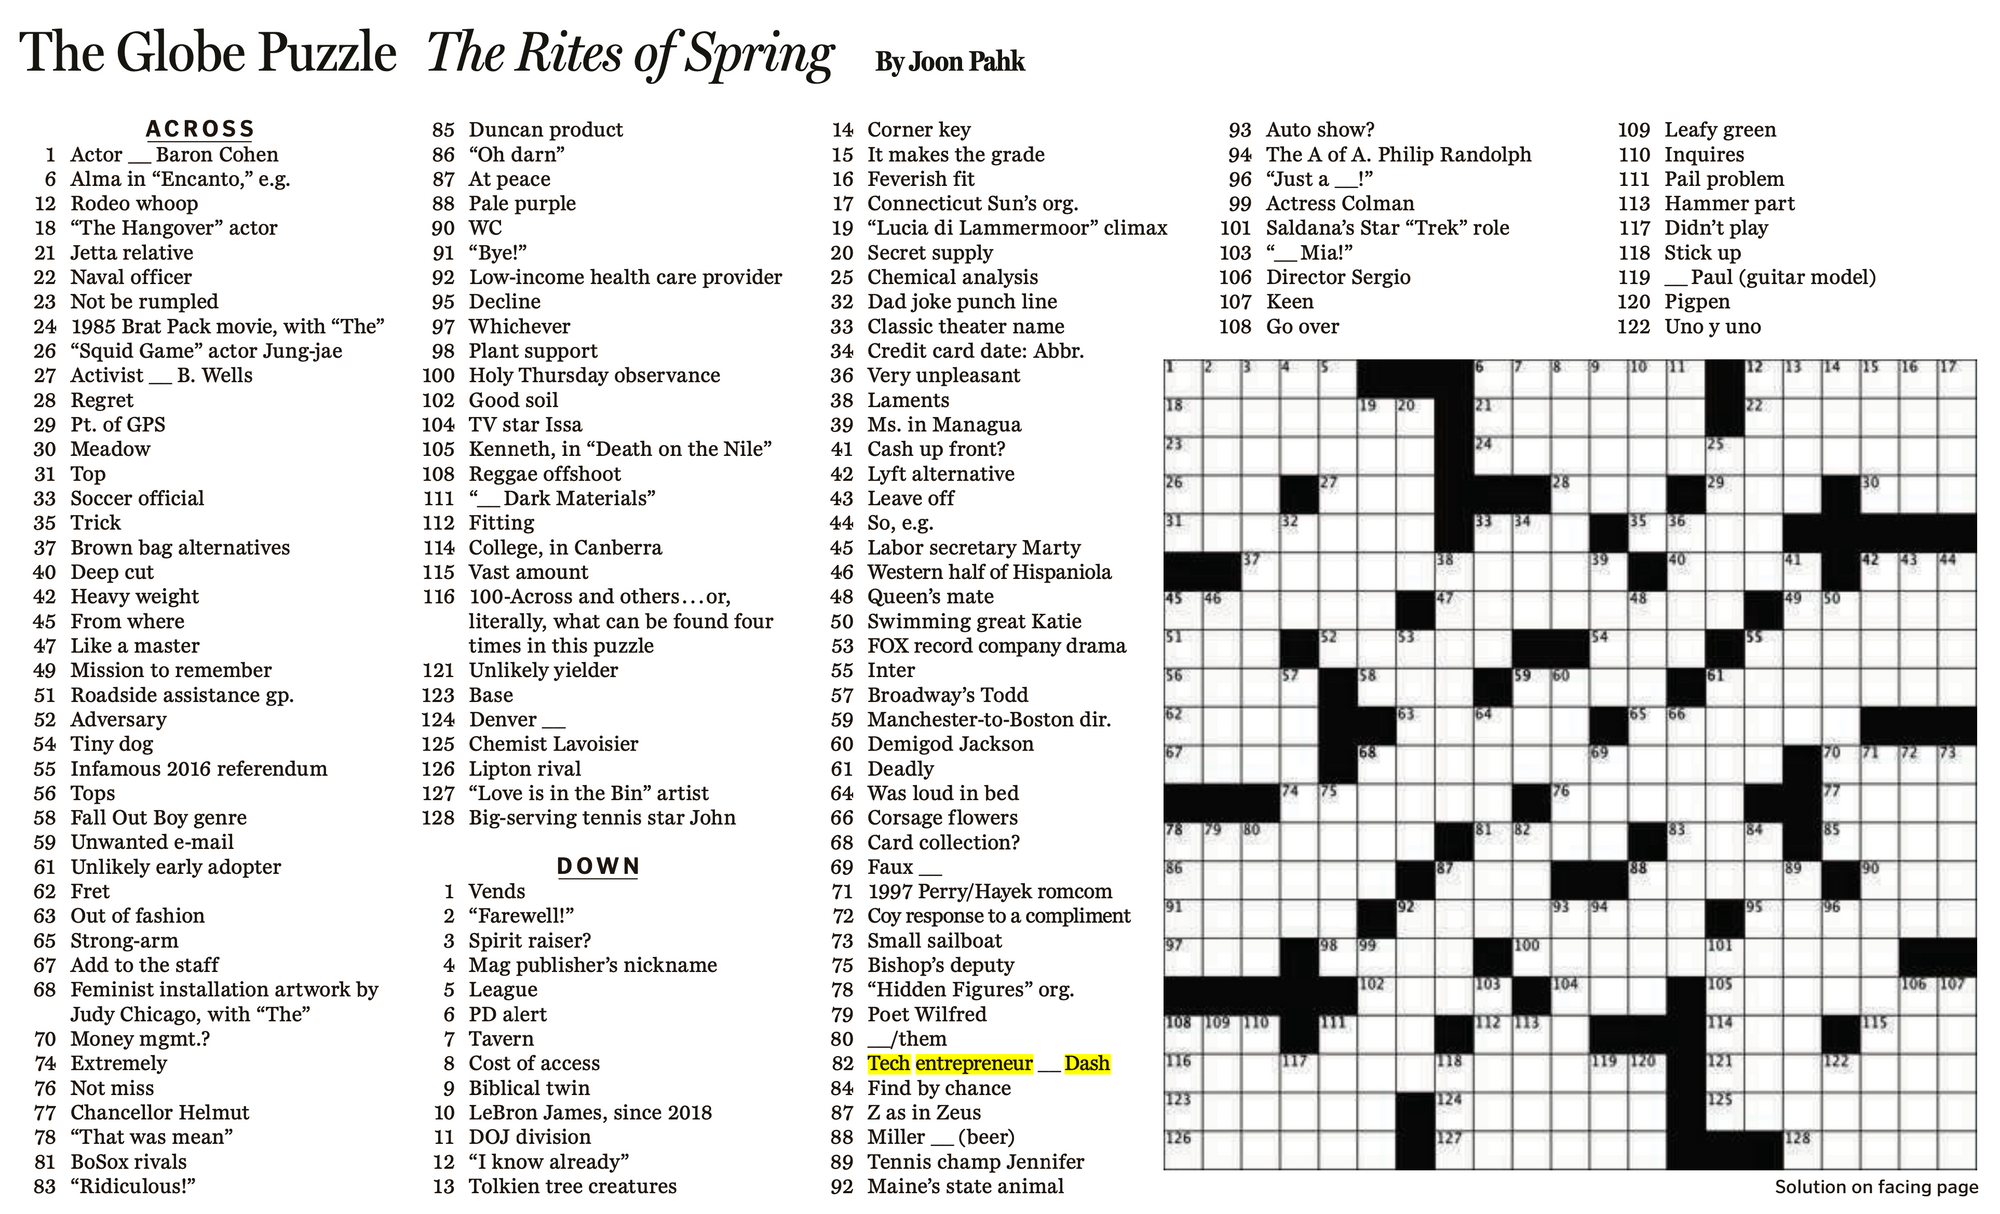 I am the answer to the Rites of Spring Puzzle